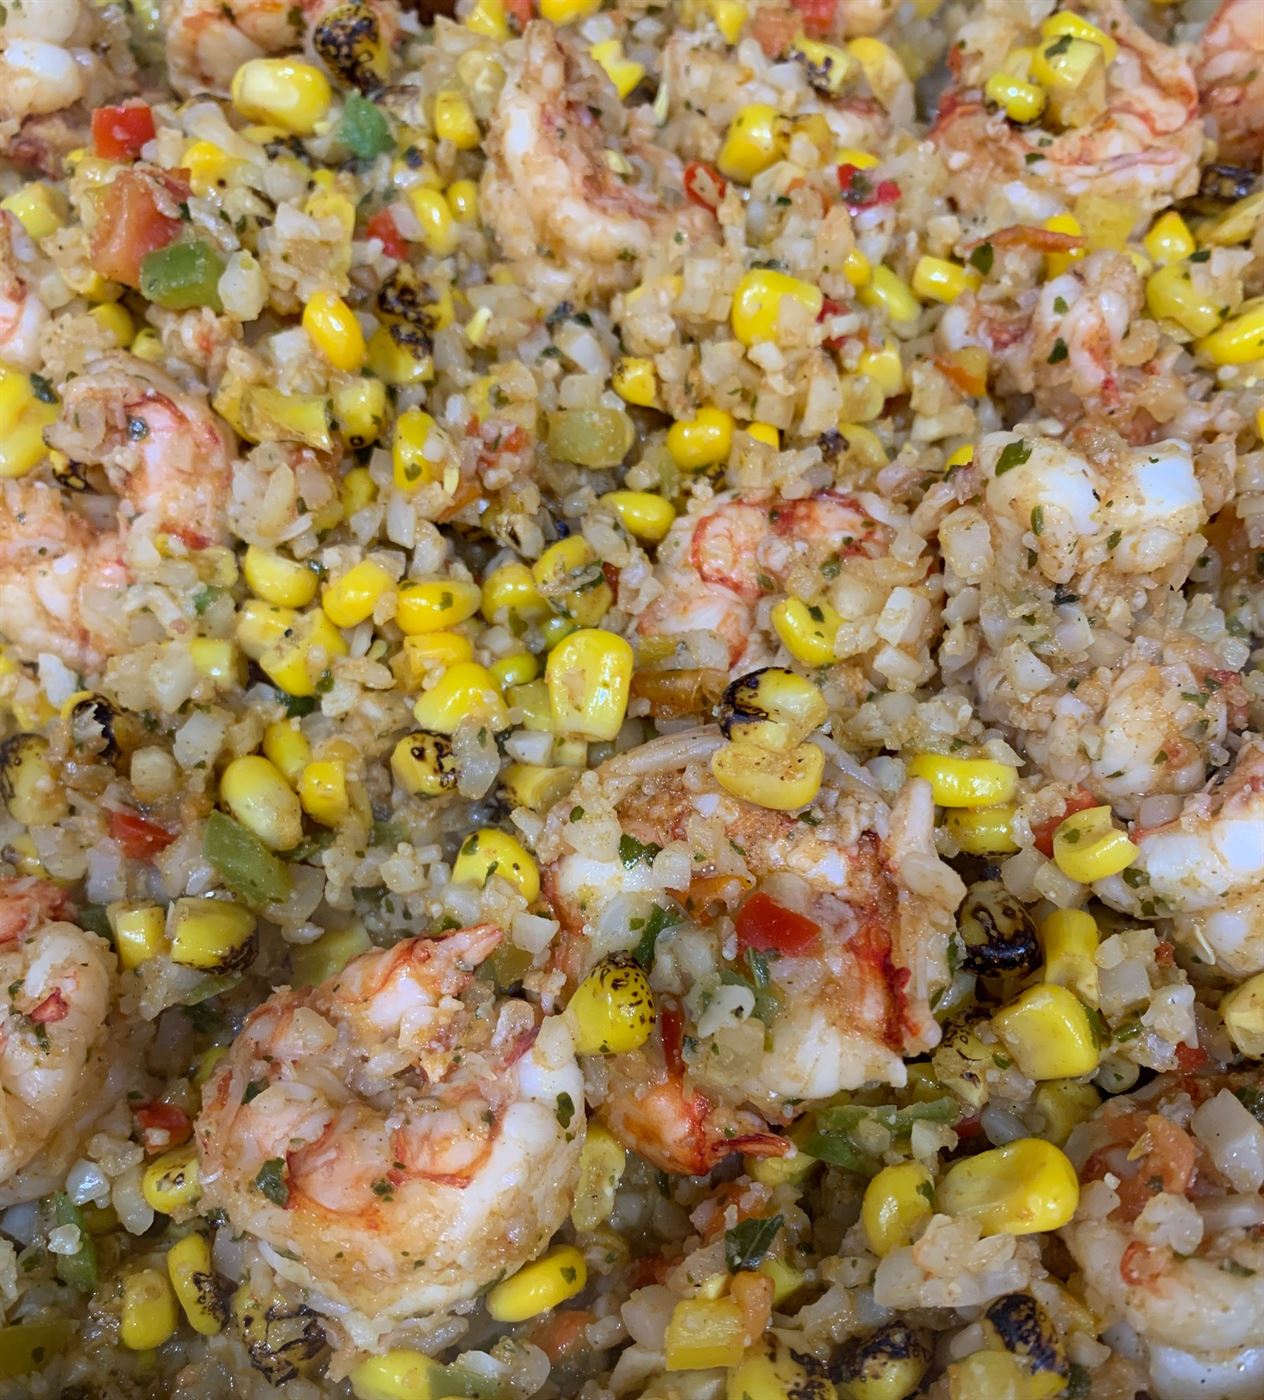 Using Trader Joe's frozen spicy Mexican cauliflower and shrimp, you can have a filling, flavorful meal in less than 15 minutes. Samantha Bailey | The Montclarion